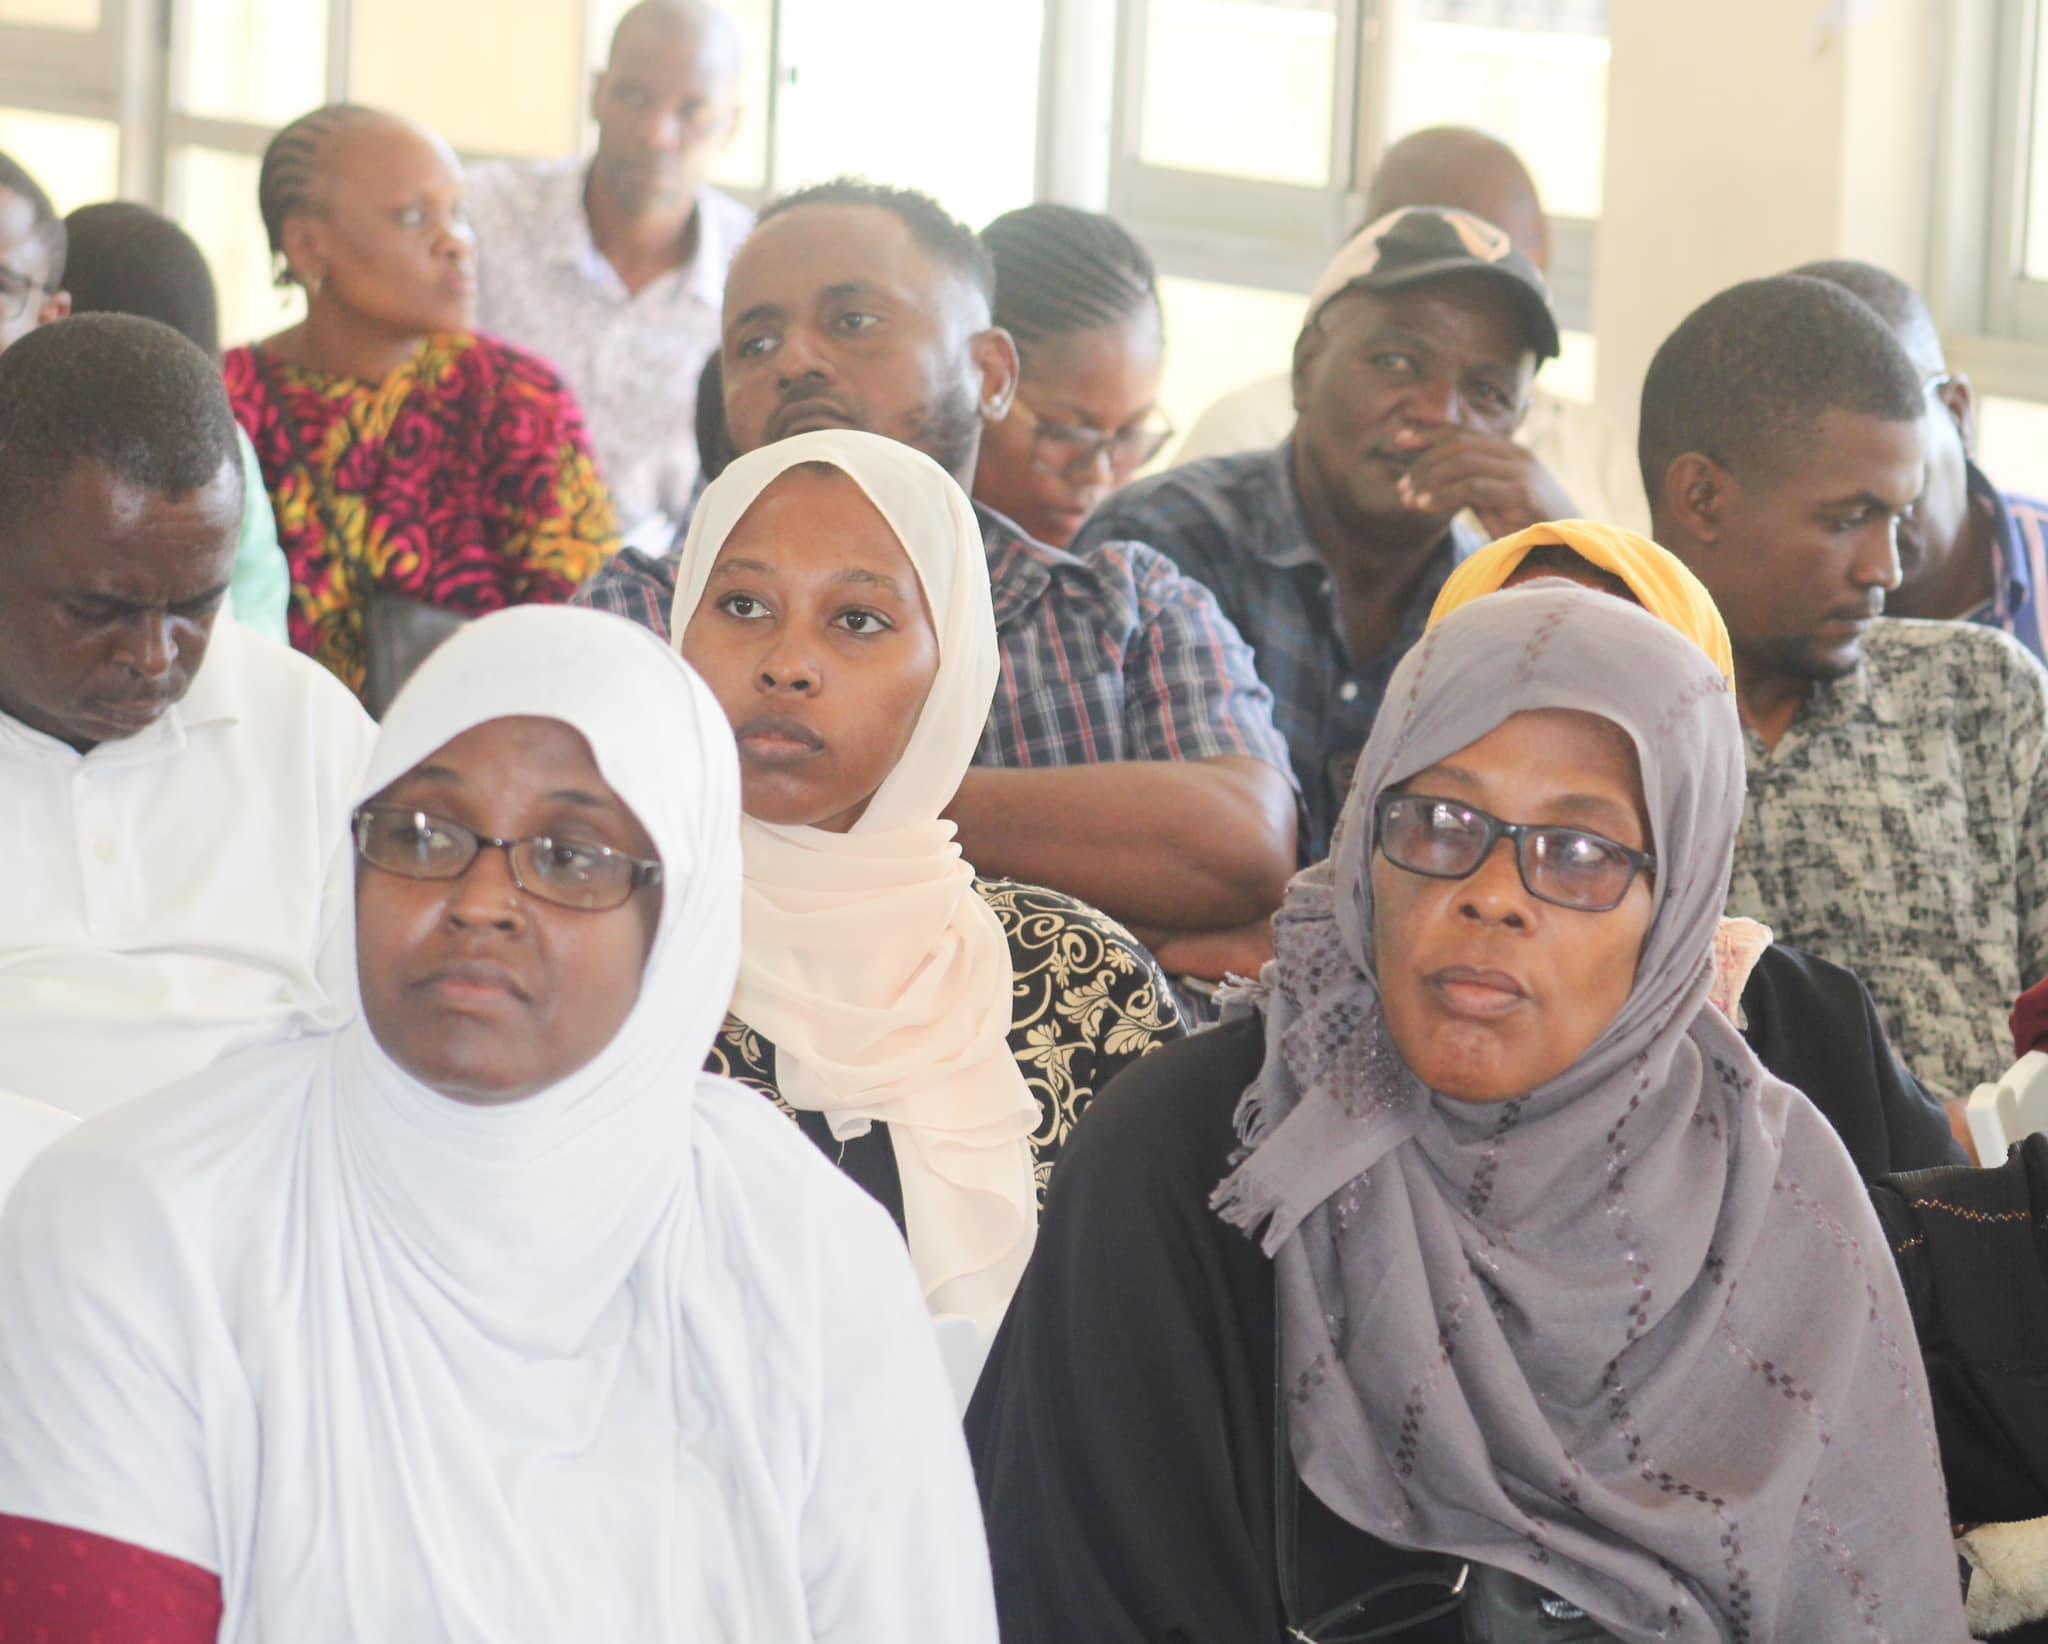 Mombasa residents call for more rehabilitation centres, hospitals for children with special needs